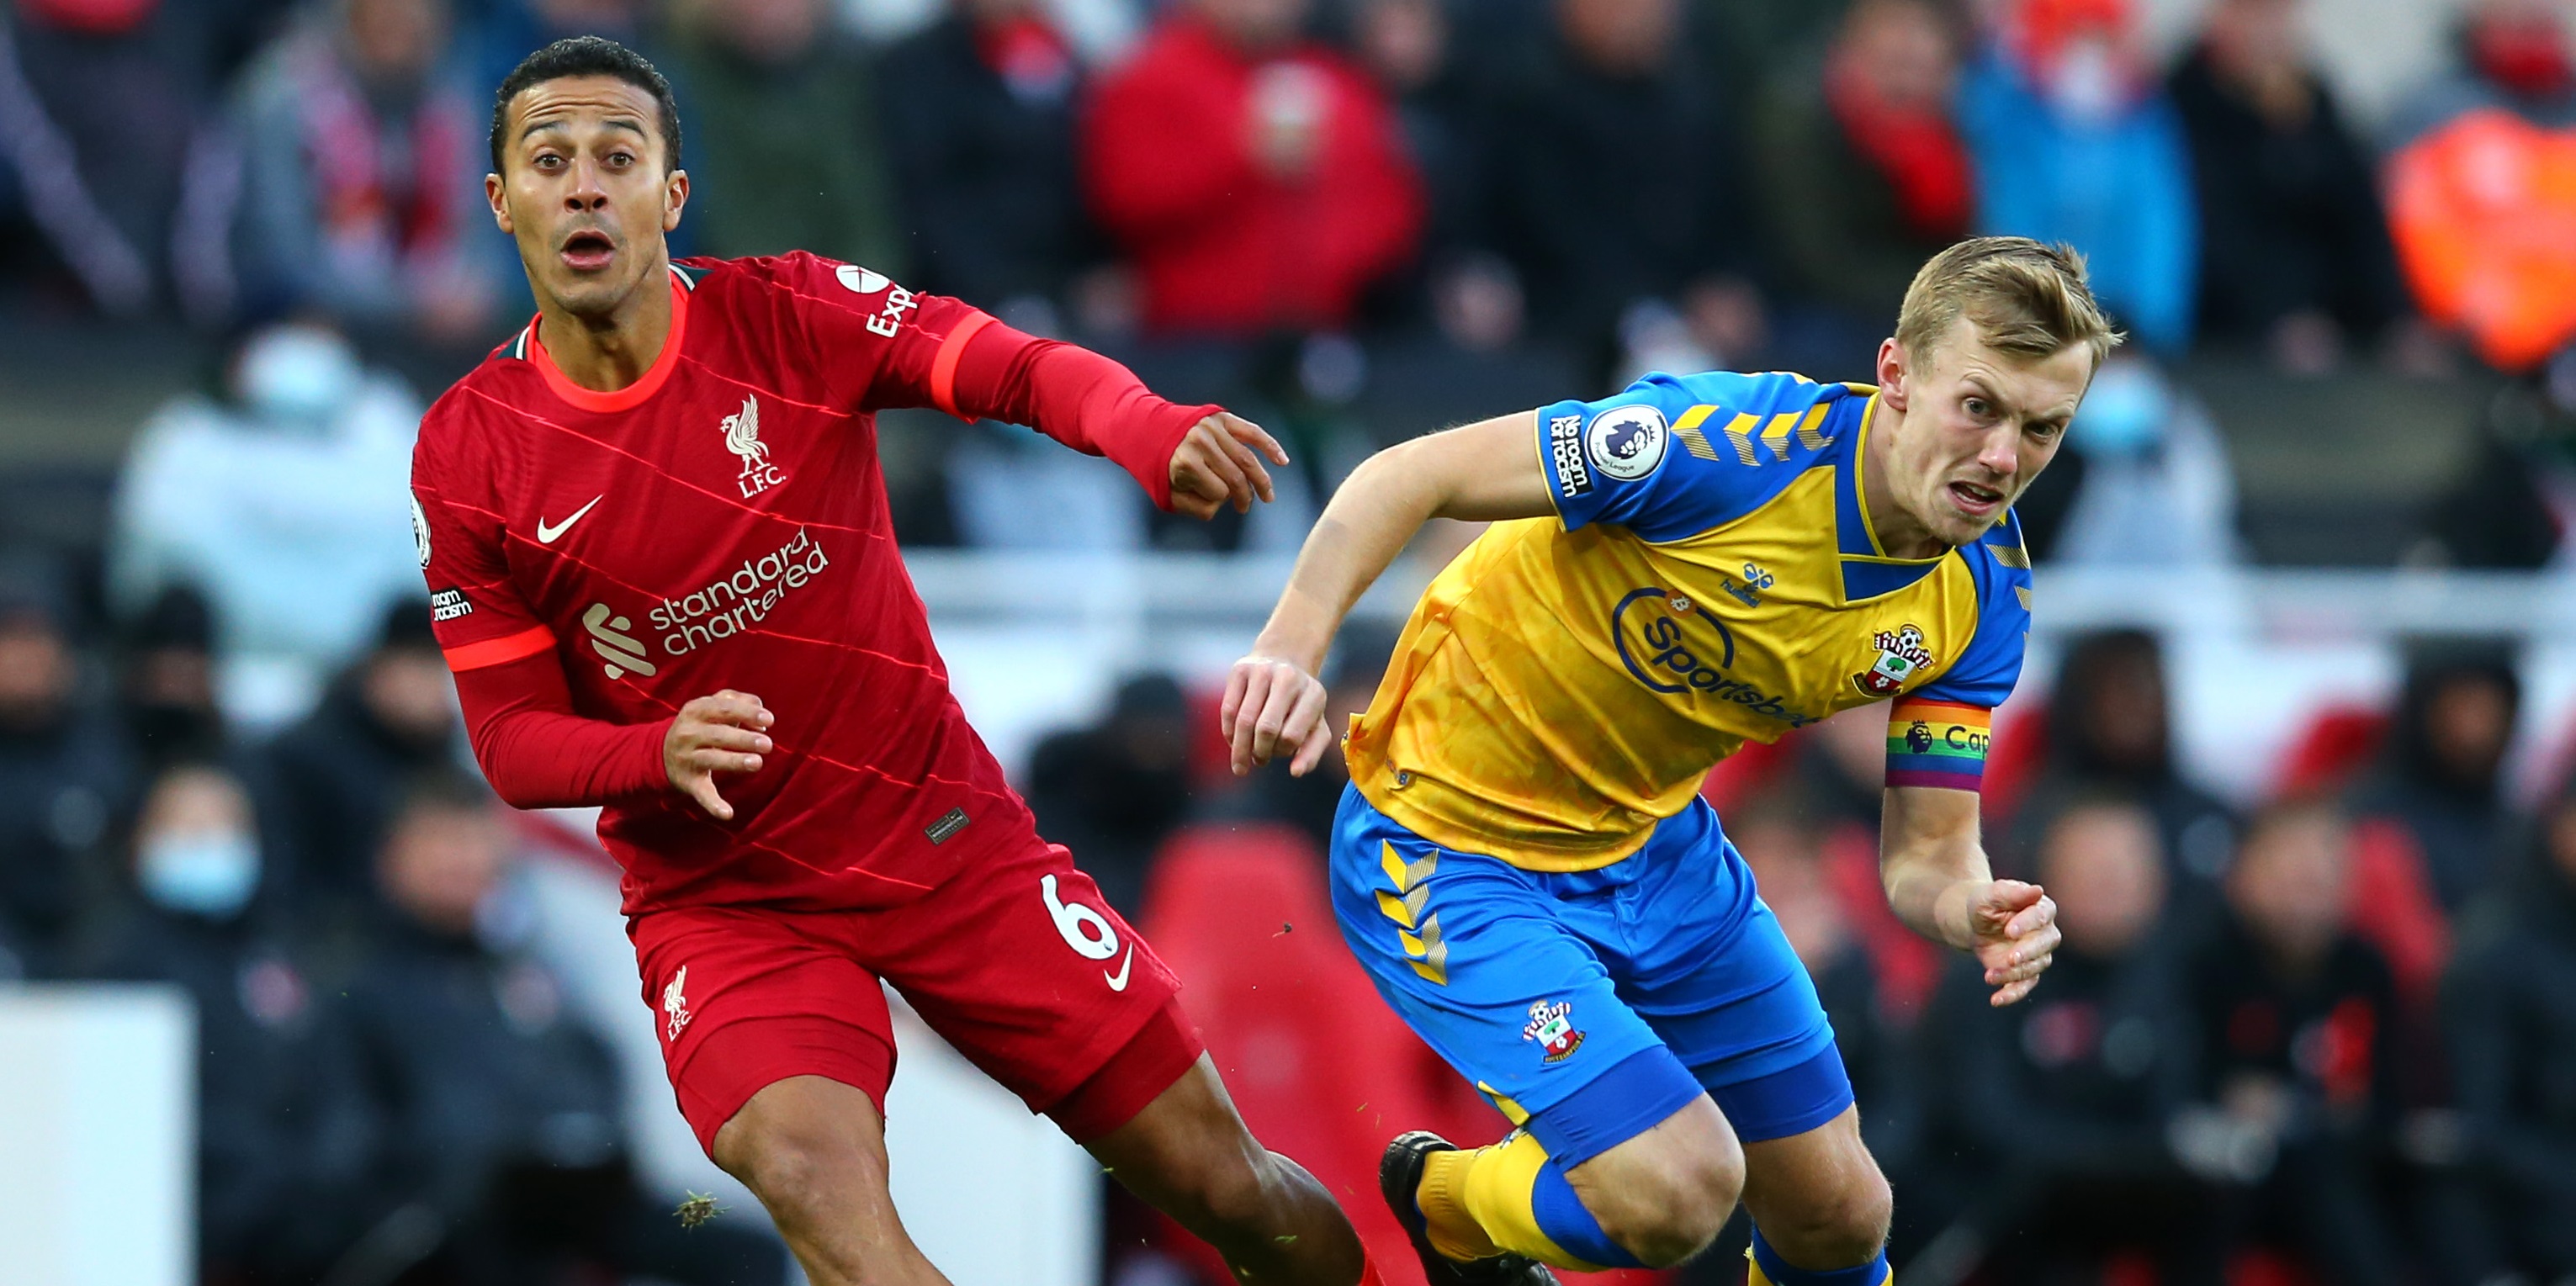 ‘He’s made for them’ – BBC Sport pundit claims Premier League midfielder is ideal fit for Liverpool